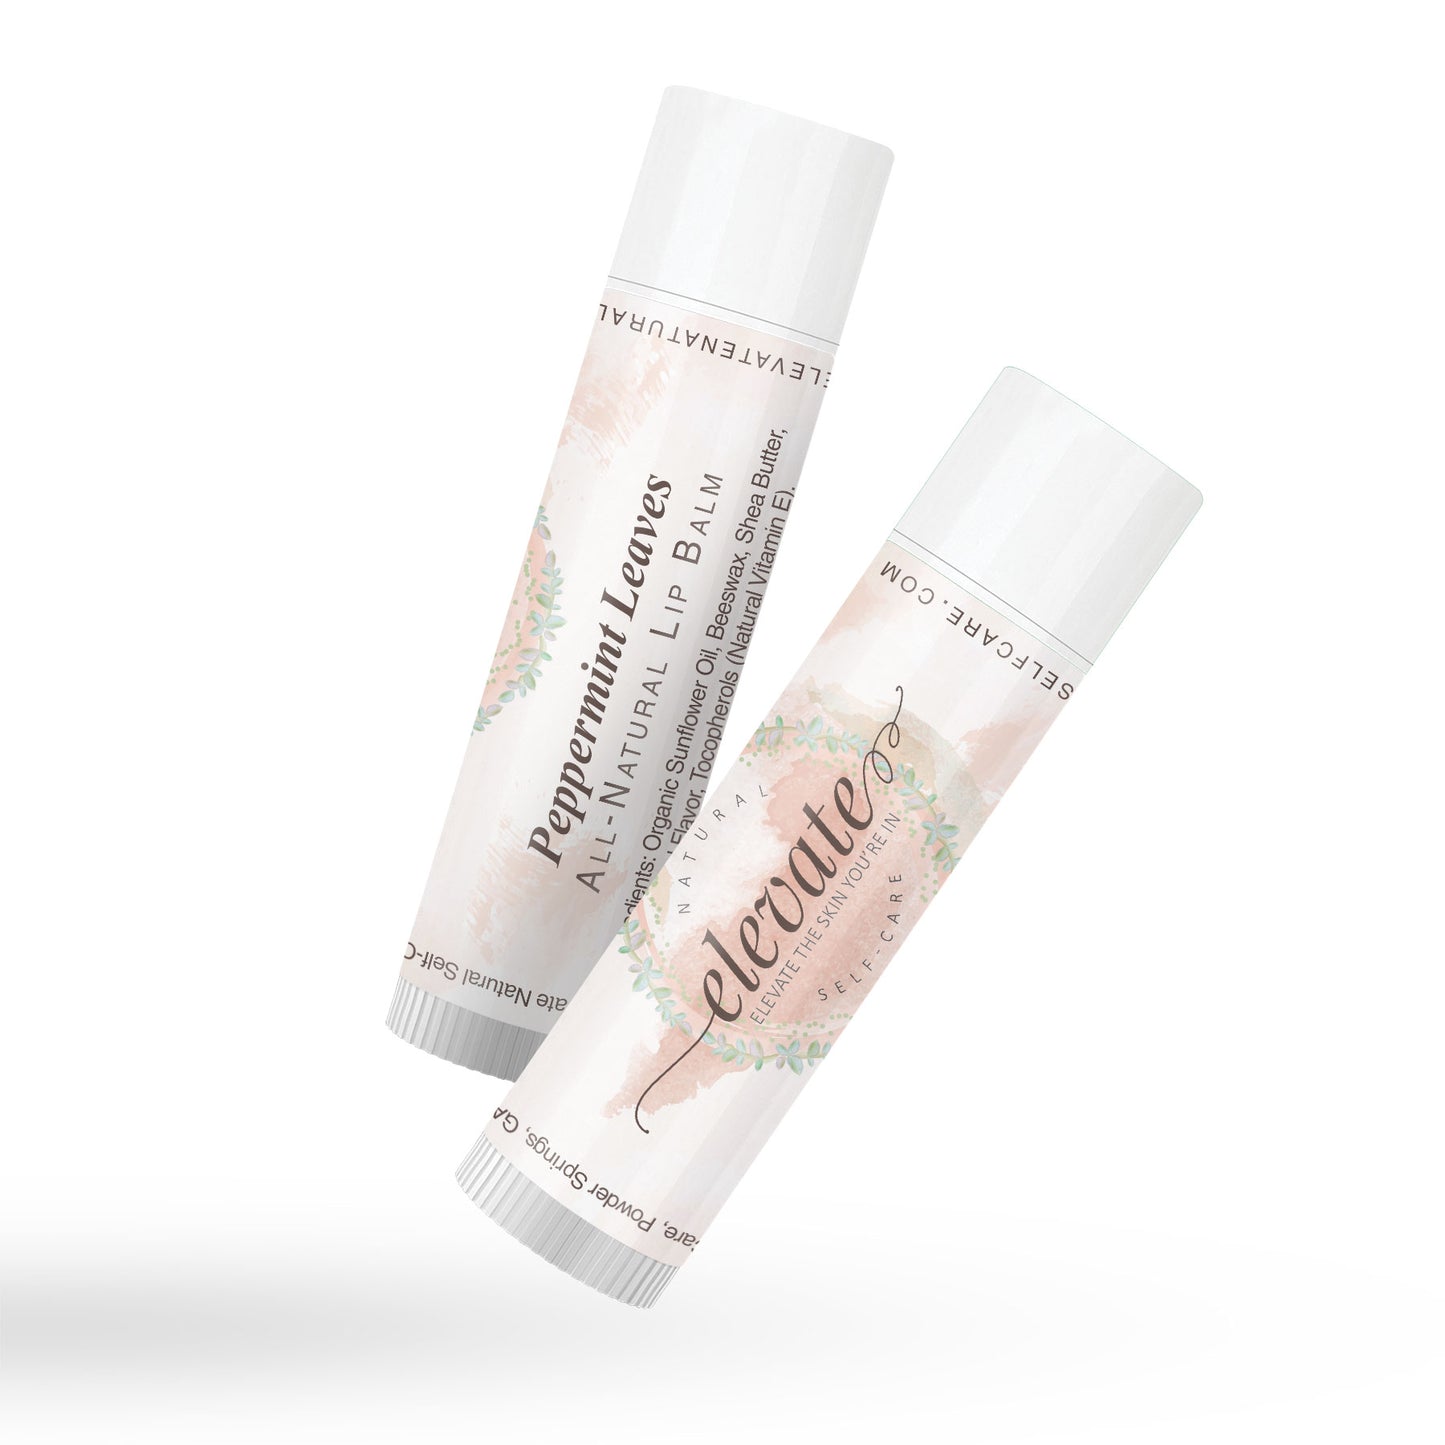 Peppermint Leaves All-Natural Lip Balm will naturally revitalize lips with our long-lasting conditioning lip balm made with sustainable and locally sourced beeswax, moisturizing shea butter, sunflower oil, and vitamin E oil with fresh and minty peppermint flavor oil. 